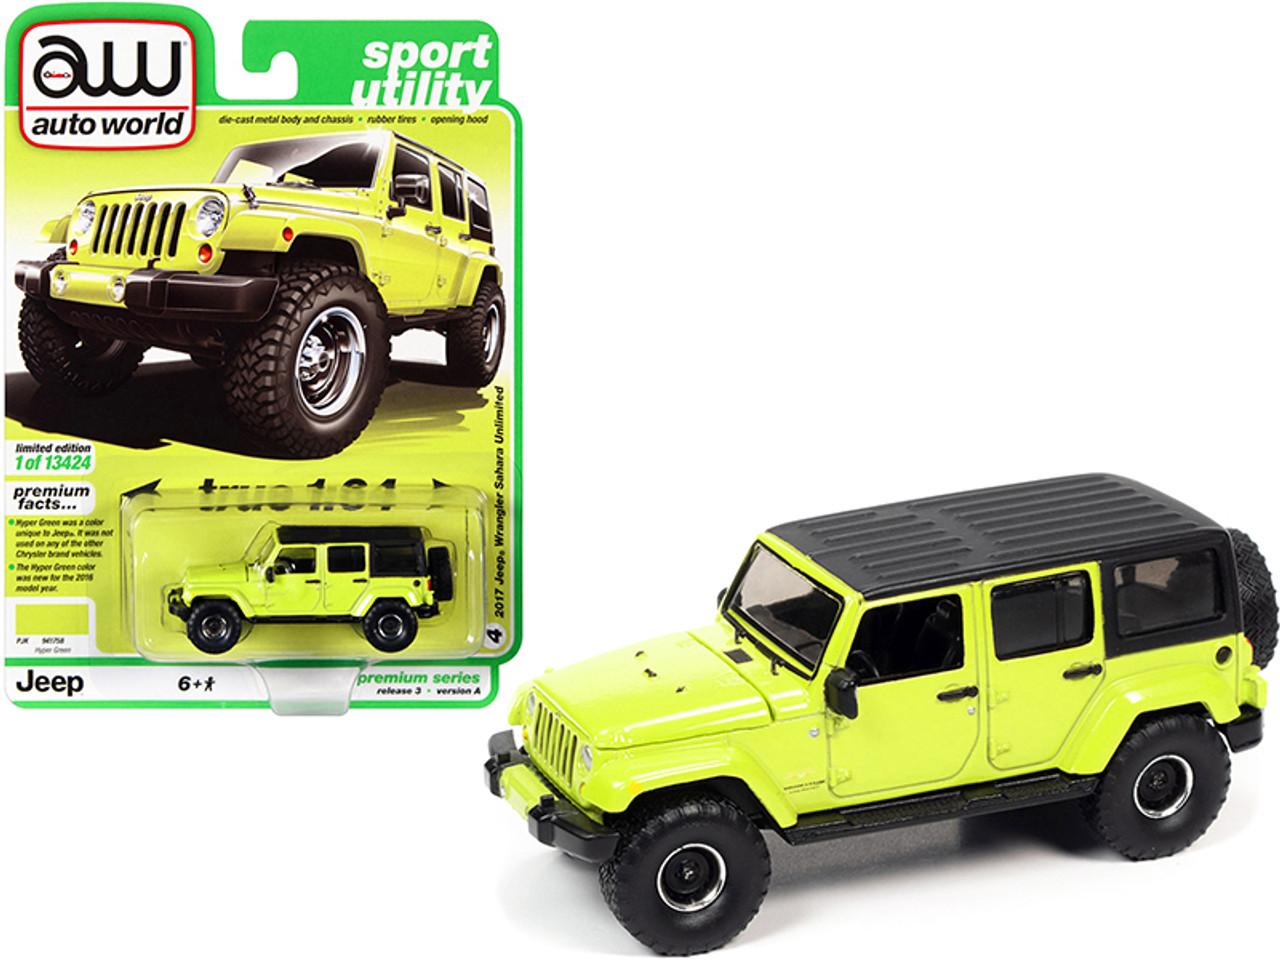 2017 Jeep Wrangler Sahara Unlimited with Off-Road Wheels Hyper Green with Matt Black Top "Sport Utility" Limited Edition to 13424 pieces Worldwide 1/64 Diecast Model Car by Autoworld